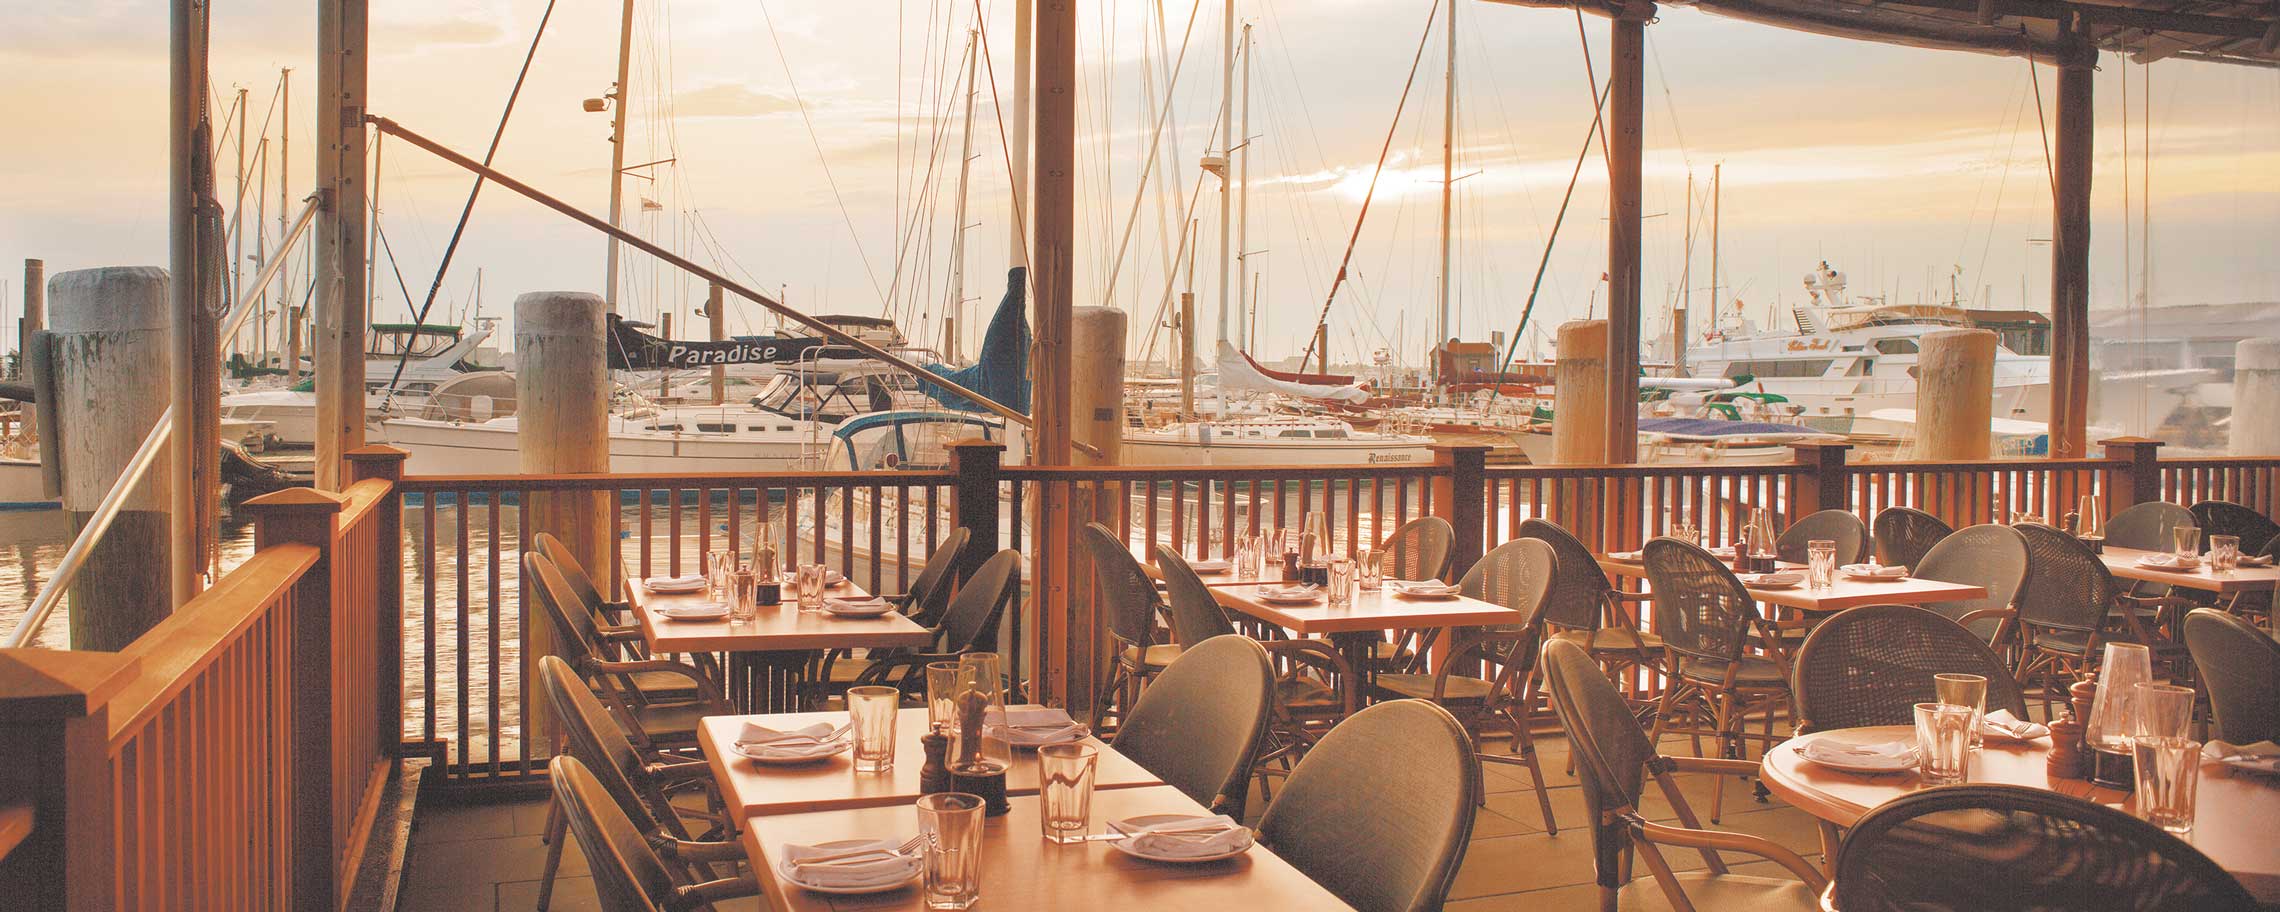 view of water and boats from Newport Restaurant Group location